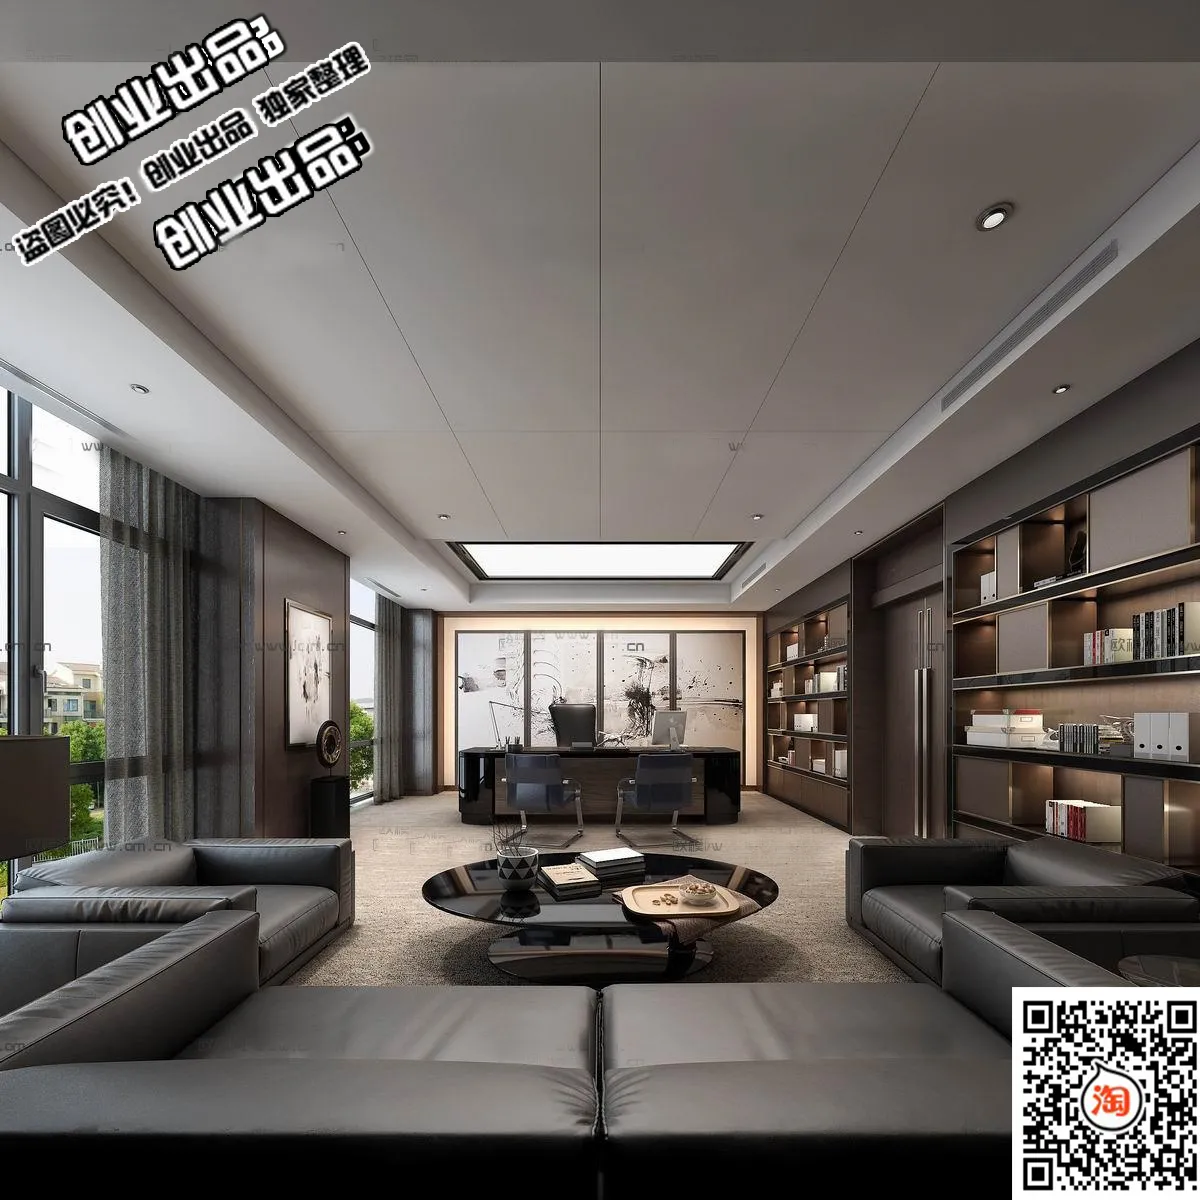 3D OFFICE INTERIOR (VRAY) – MANAGER ROOM 3D SCENES – 167